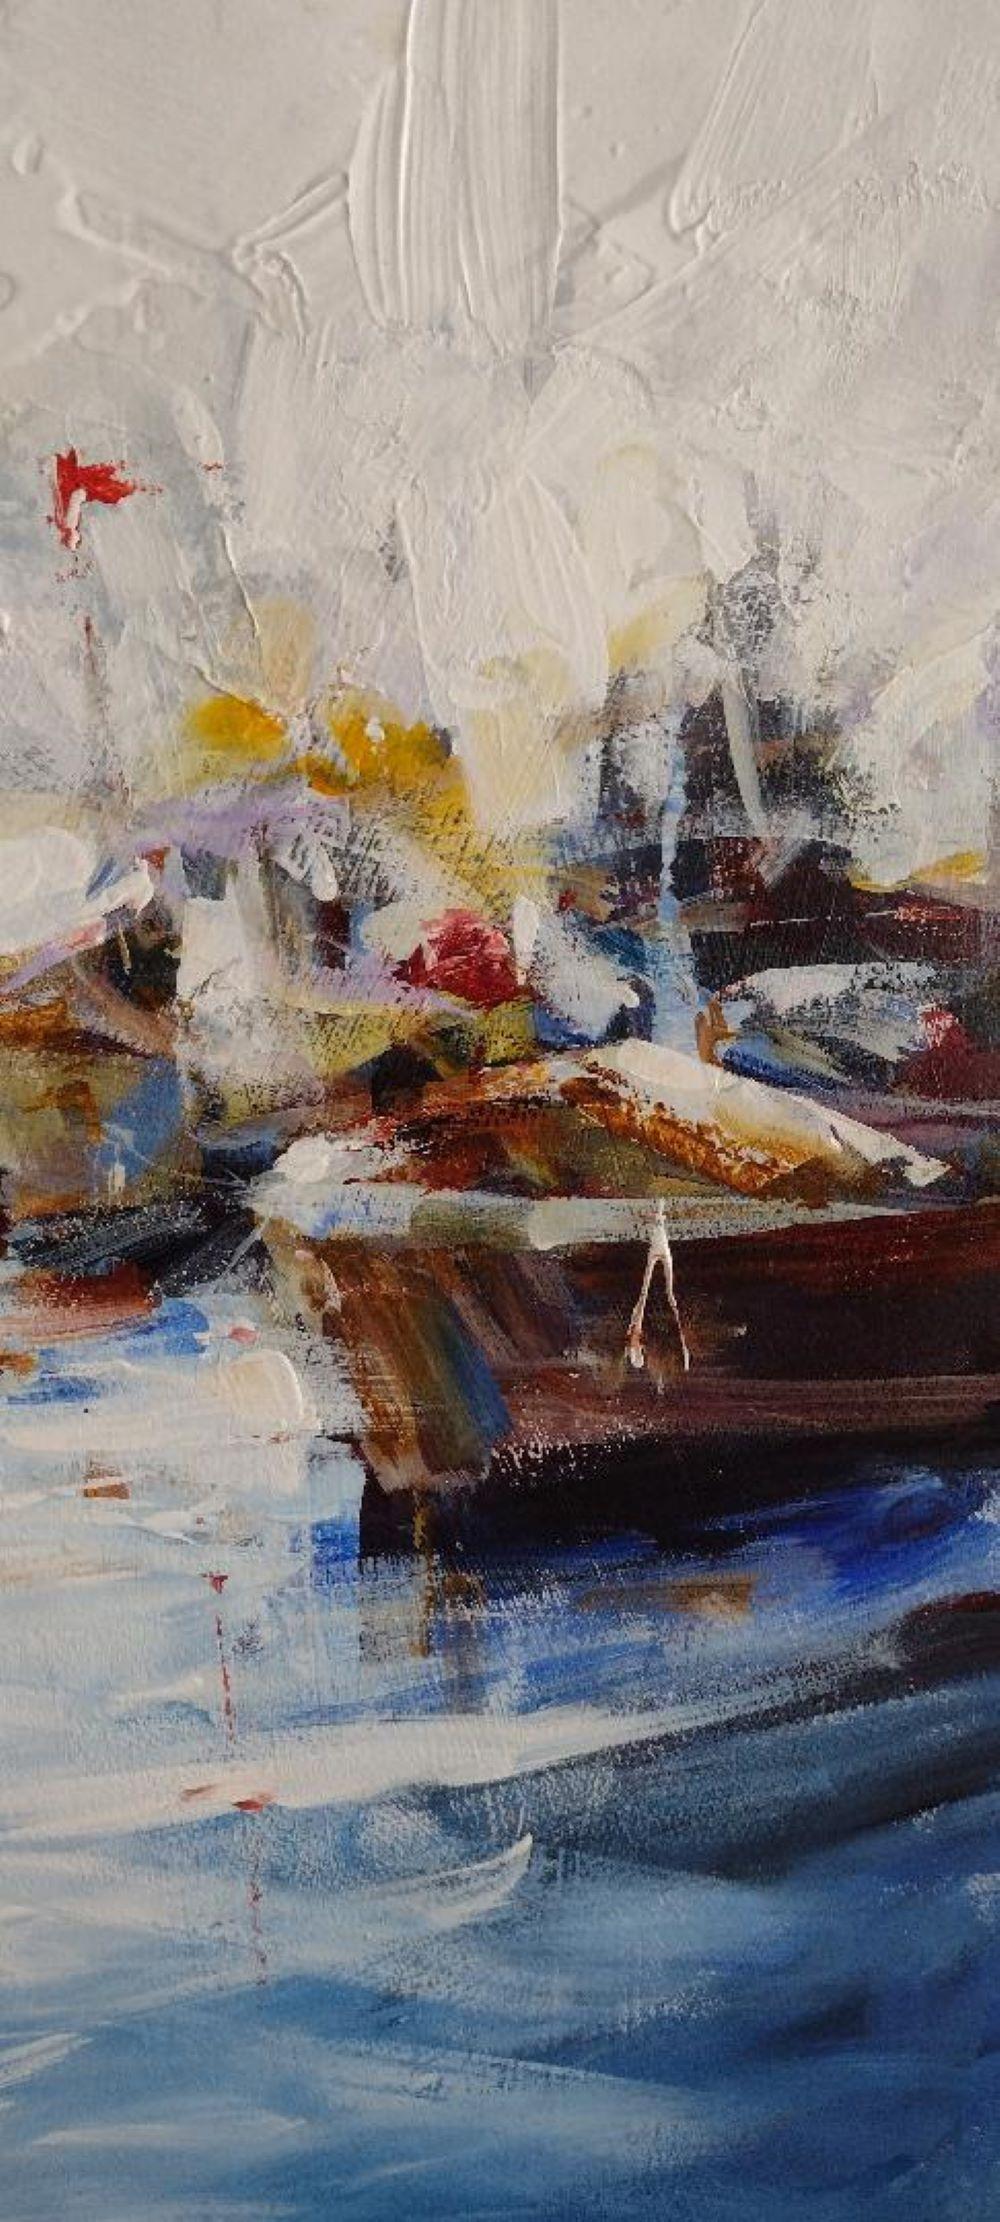 Cozy Days - Contemporary expressionist boats in harbor-glowing sunlight on water - Painting by Torabi